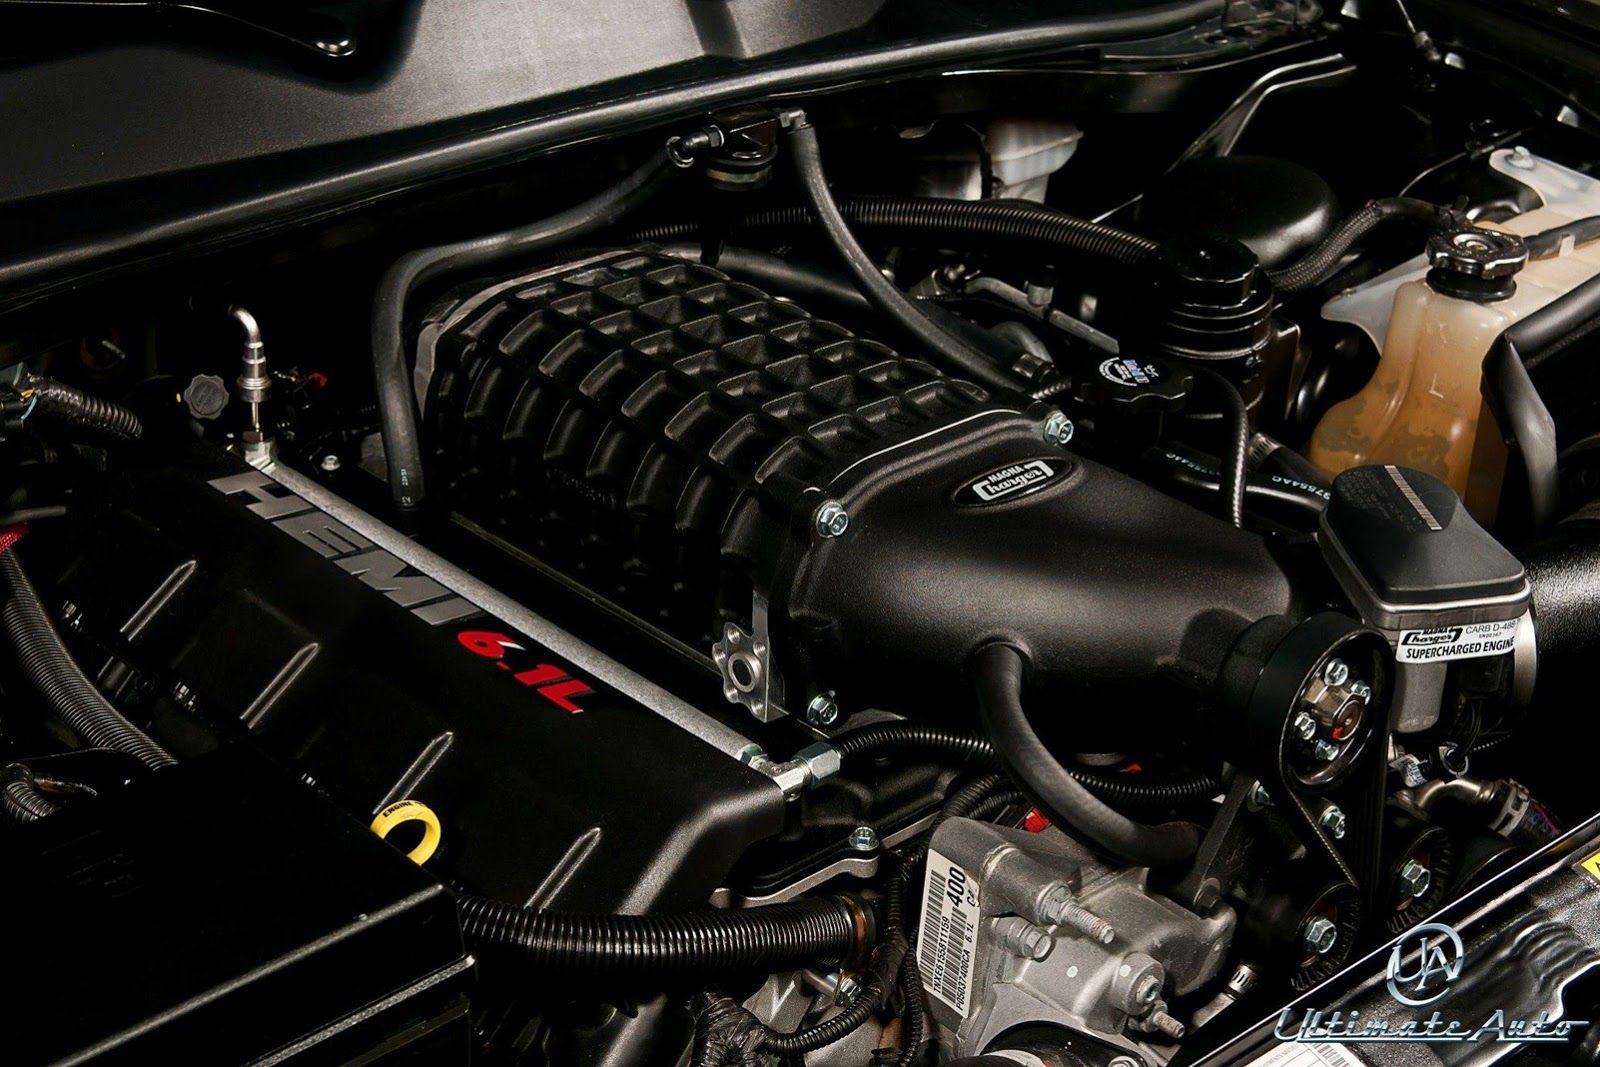 2013 Dodge Challenger SRT8 by Ultimate Auto